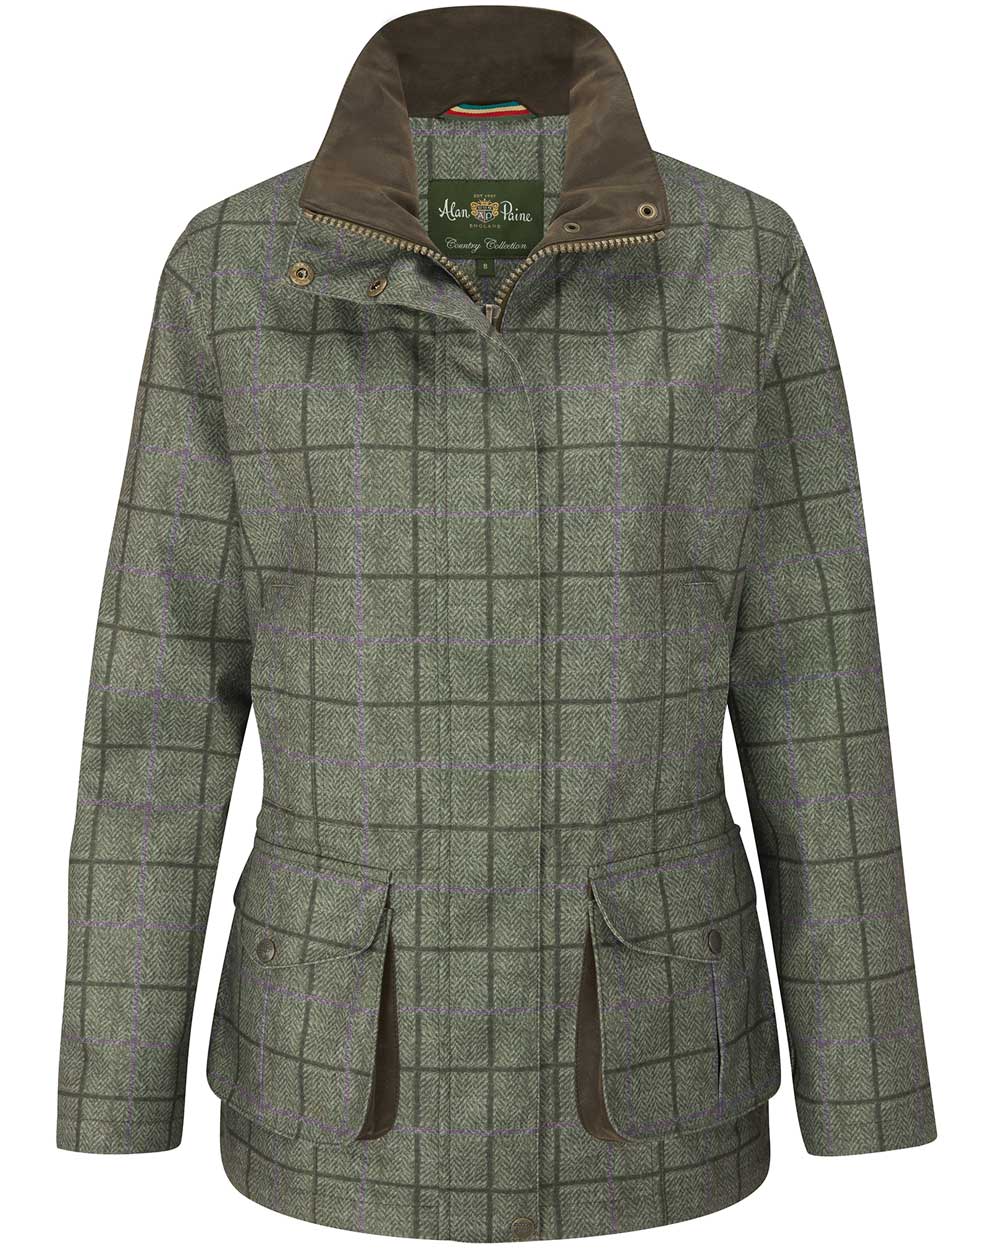 Alan Paine Womens Didsmere Coat in Seagrass